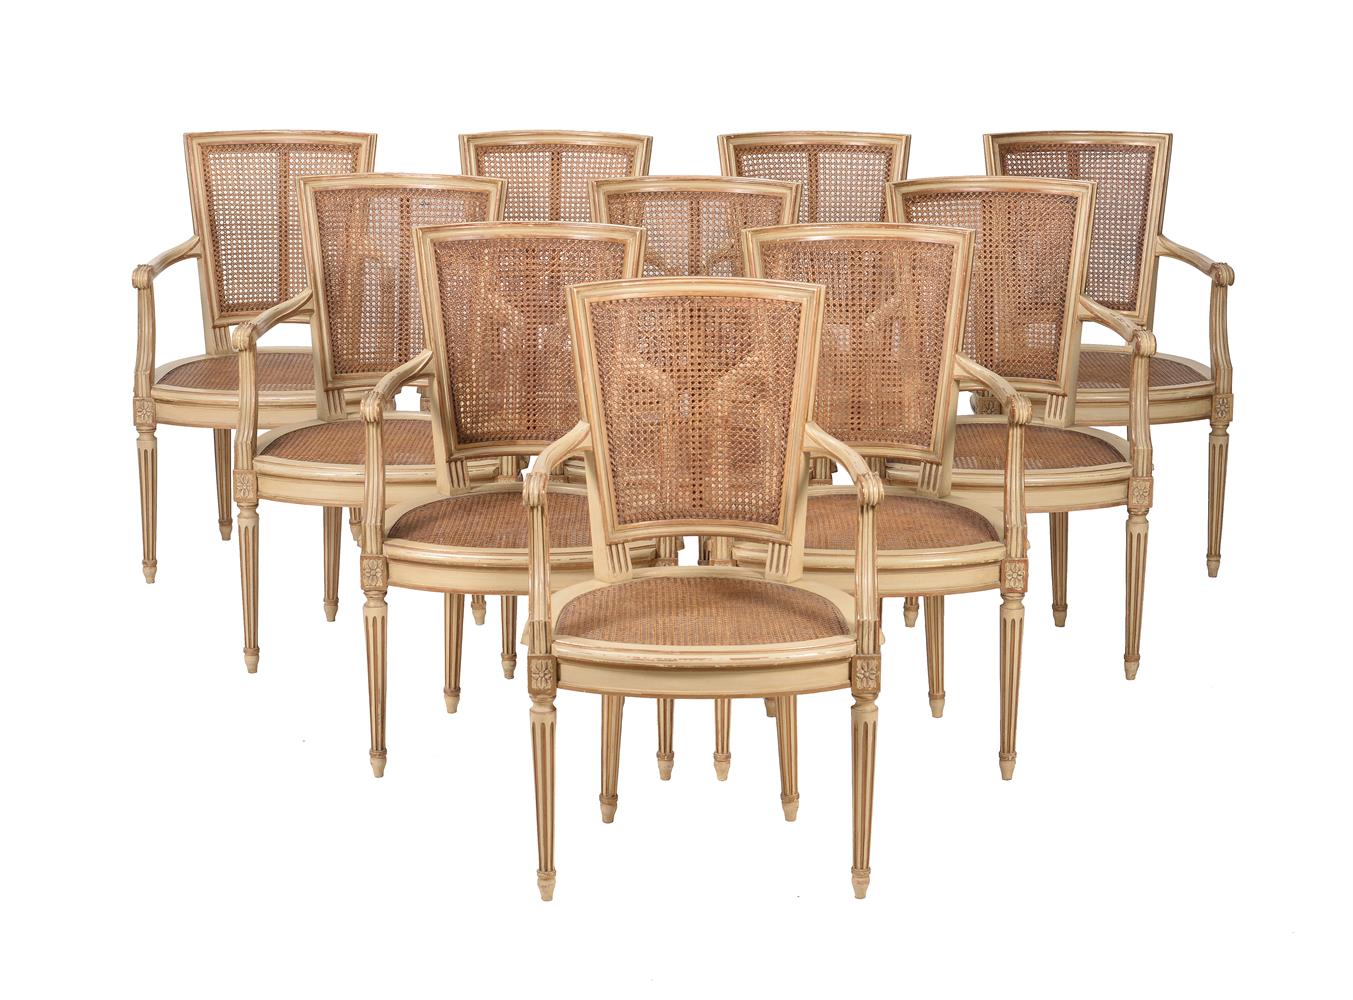 A SET OF TEN PAINTED WOOD DINING CHAIRS IN FRENCH TRANSITIONAL STYLE